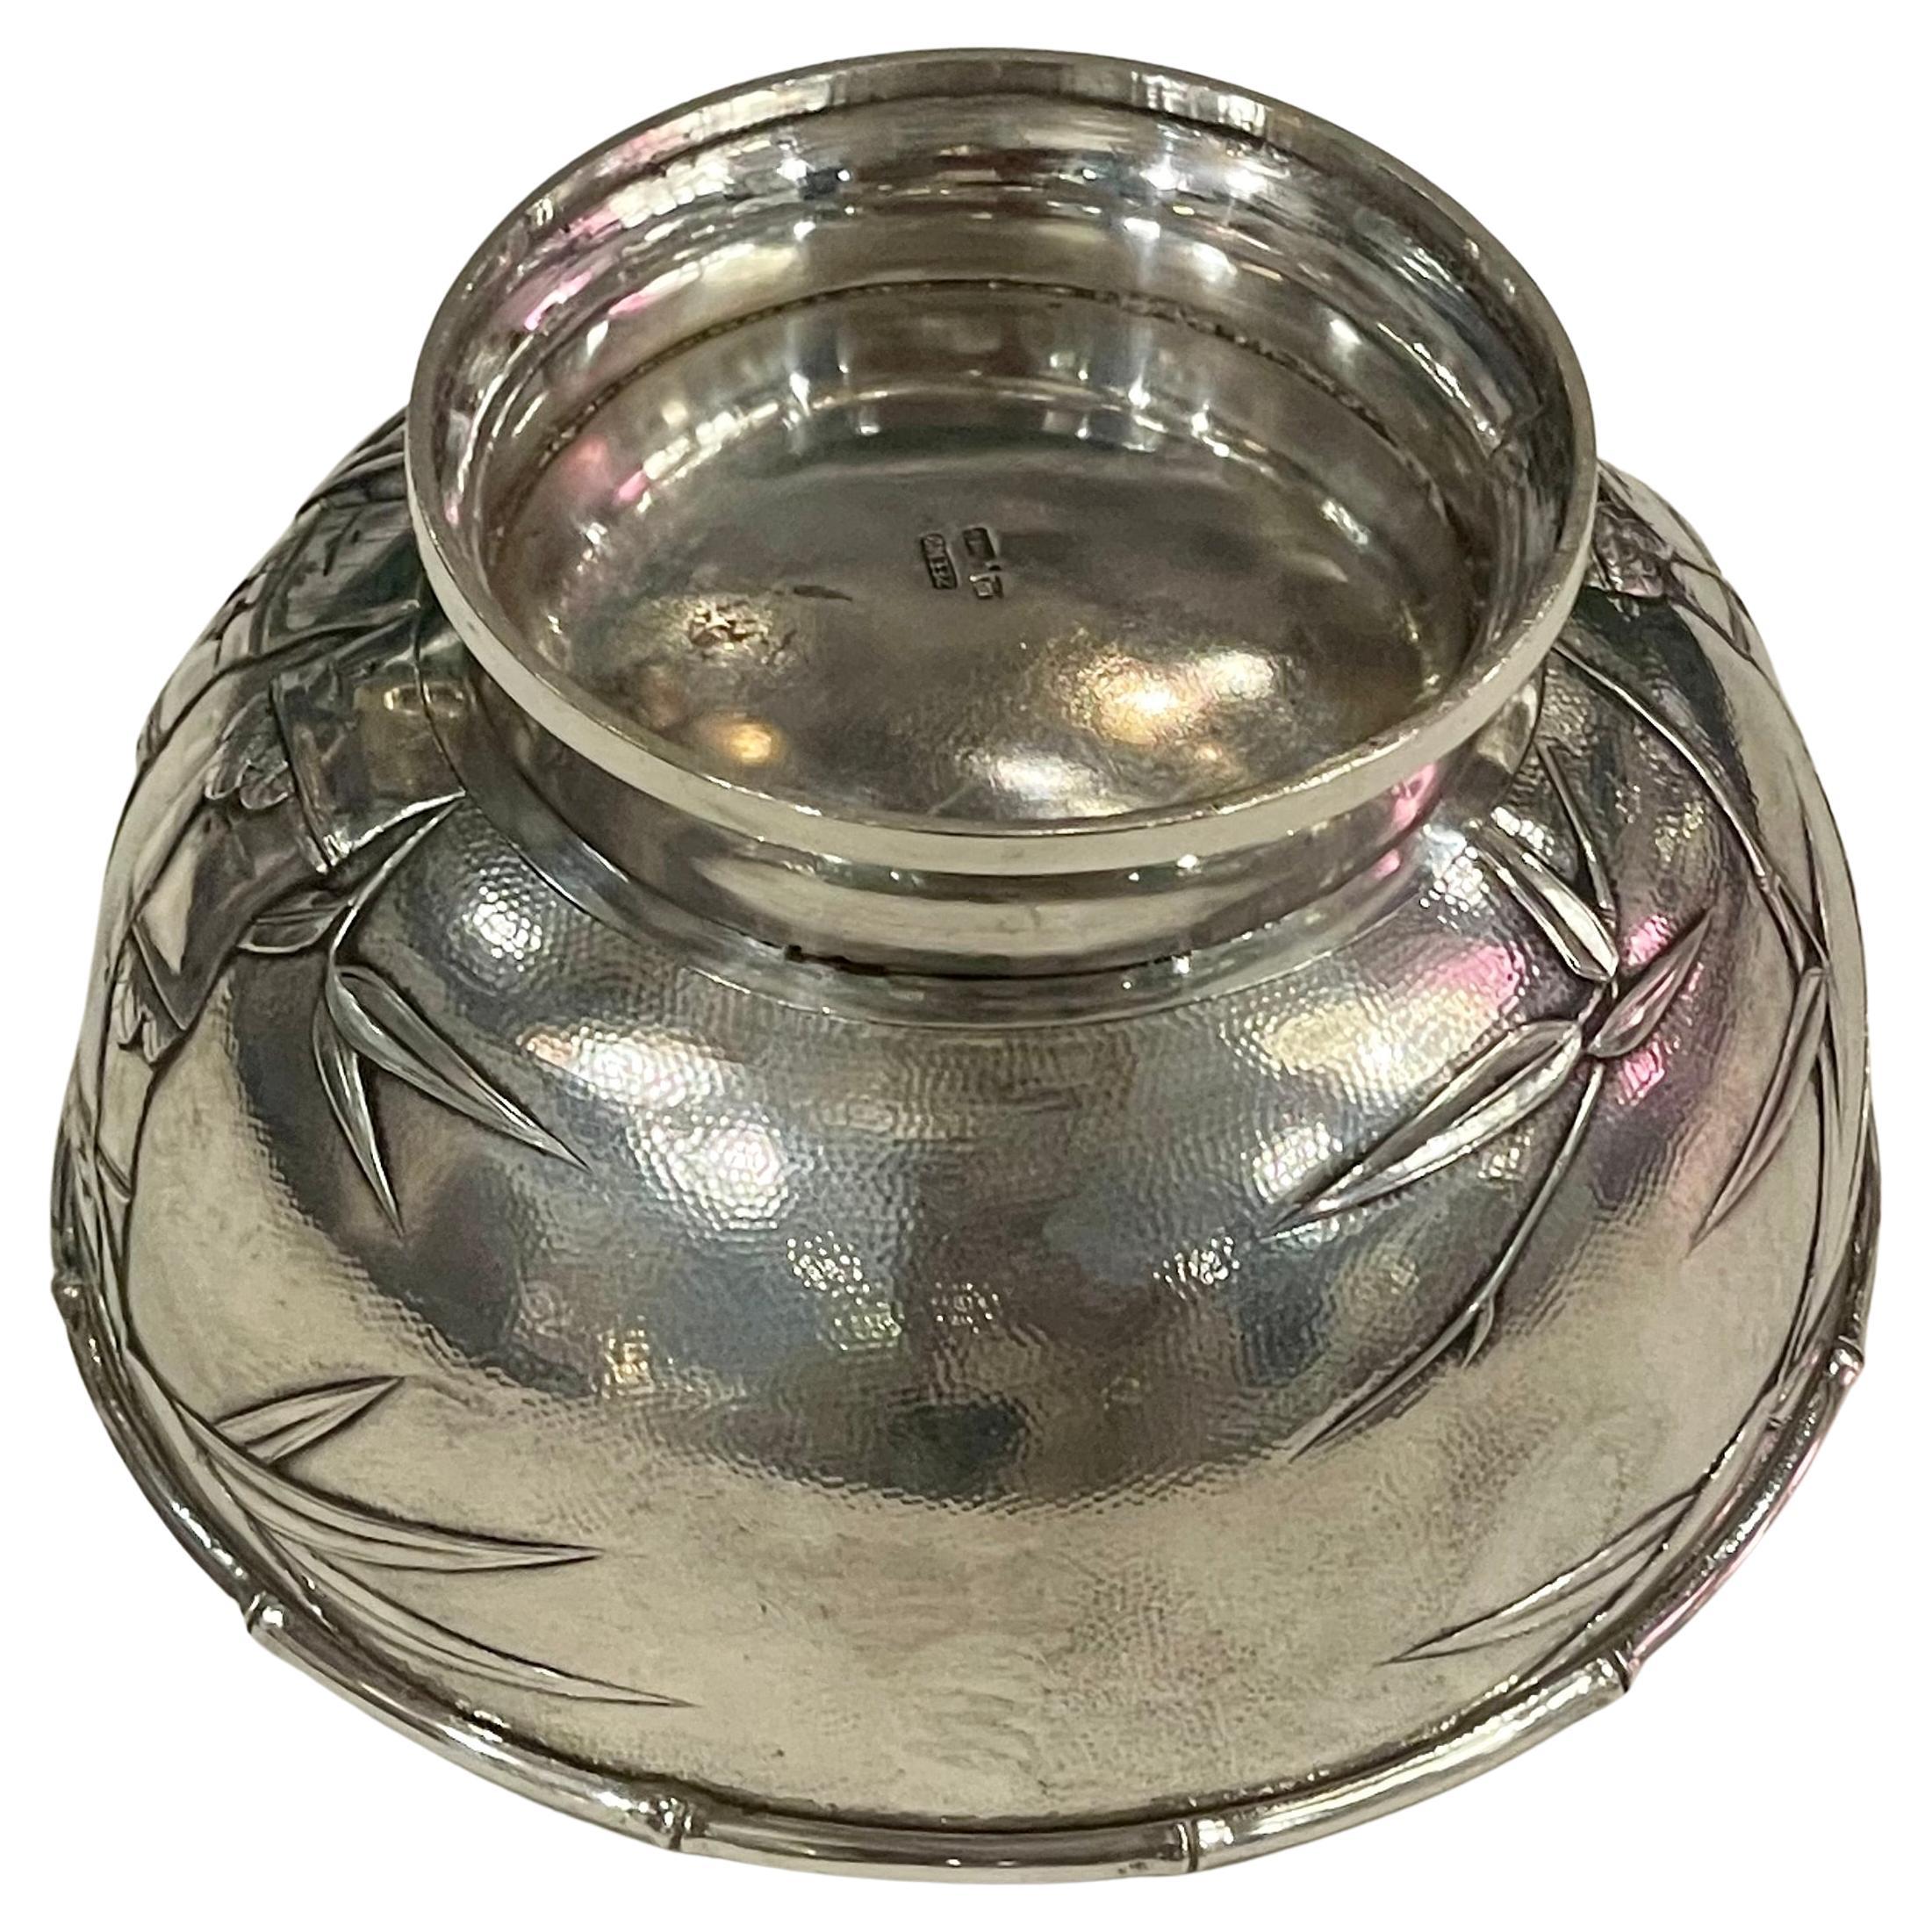 Antique Silver Chinoiserie Bowl with Hallmark 
Circa Late 19th Century
Sourced from Zeewo, Shanghai


